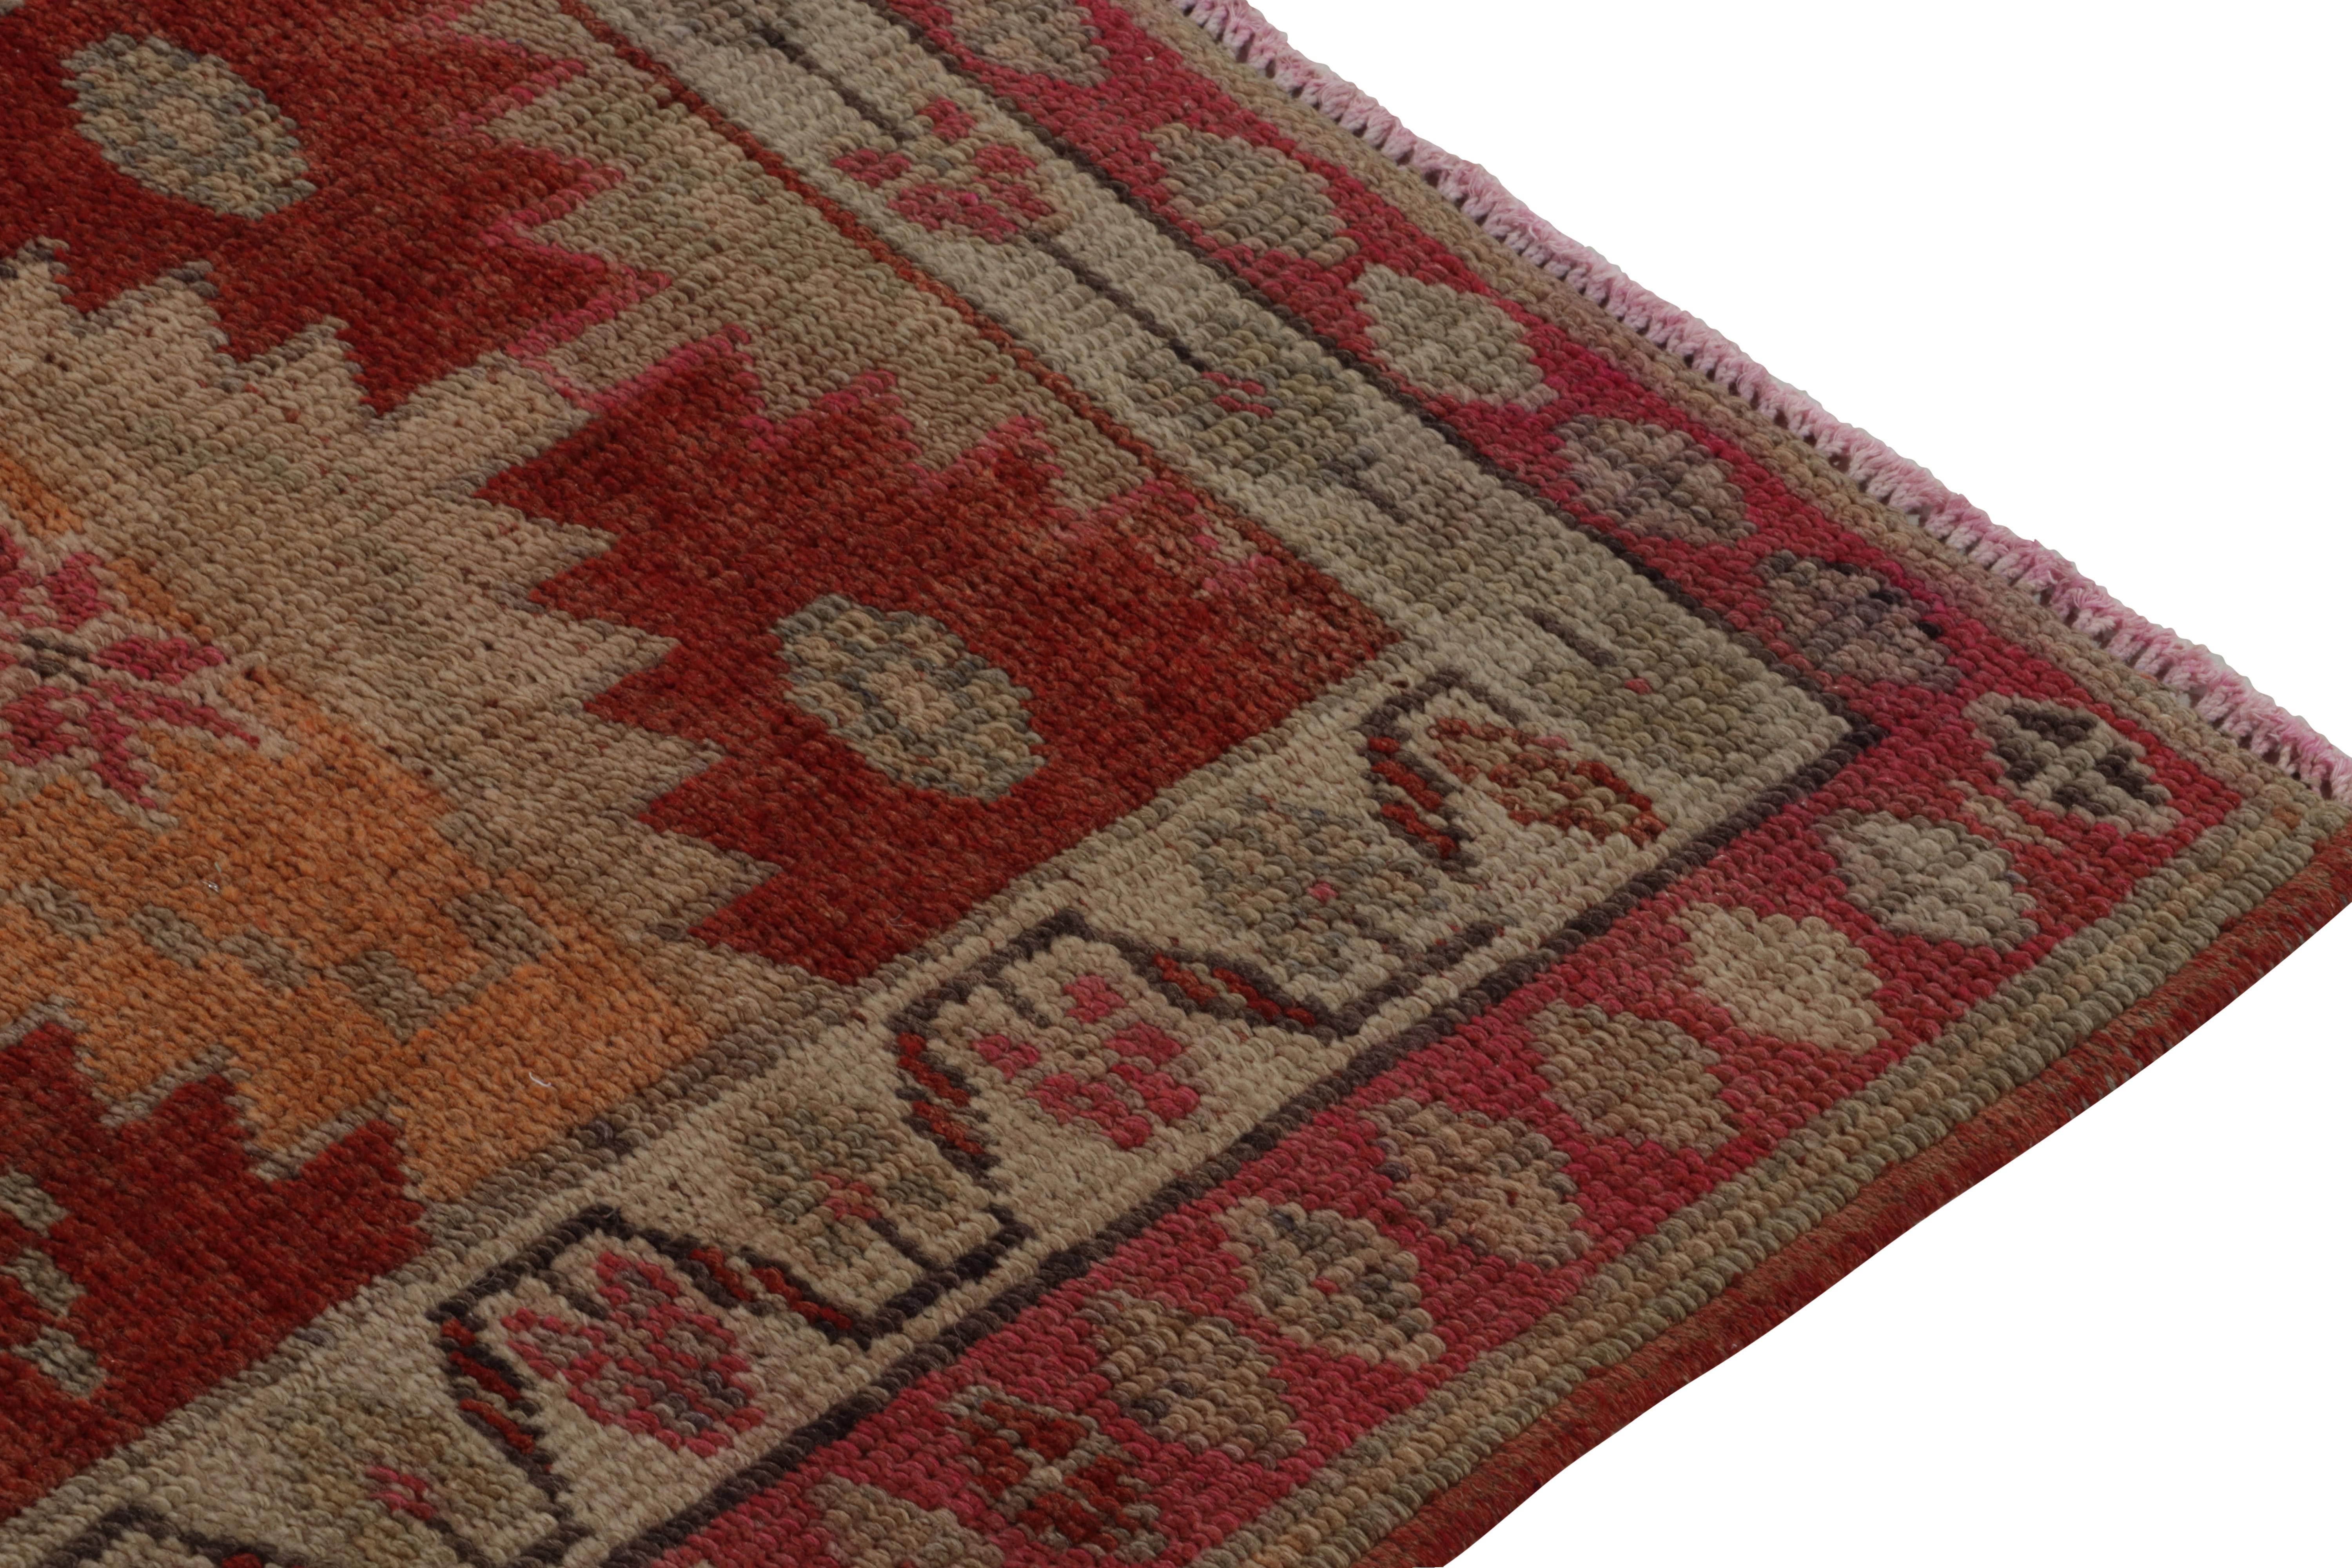 Mid-20th Century Vintage Turkish Tribal Runner in Red with Beige, Blue Patterns by Rug & Kilim For Sale